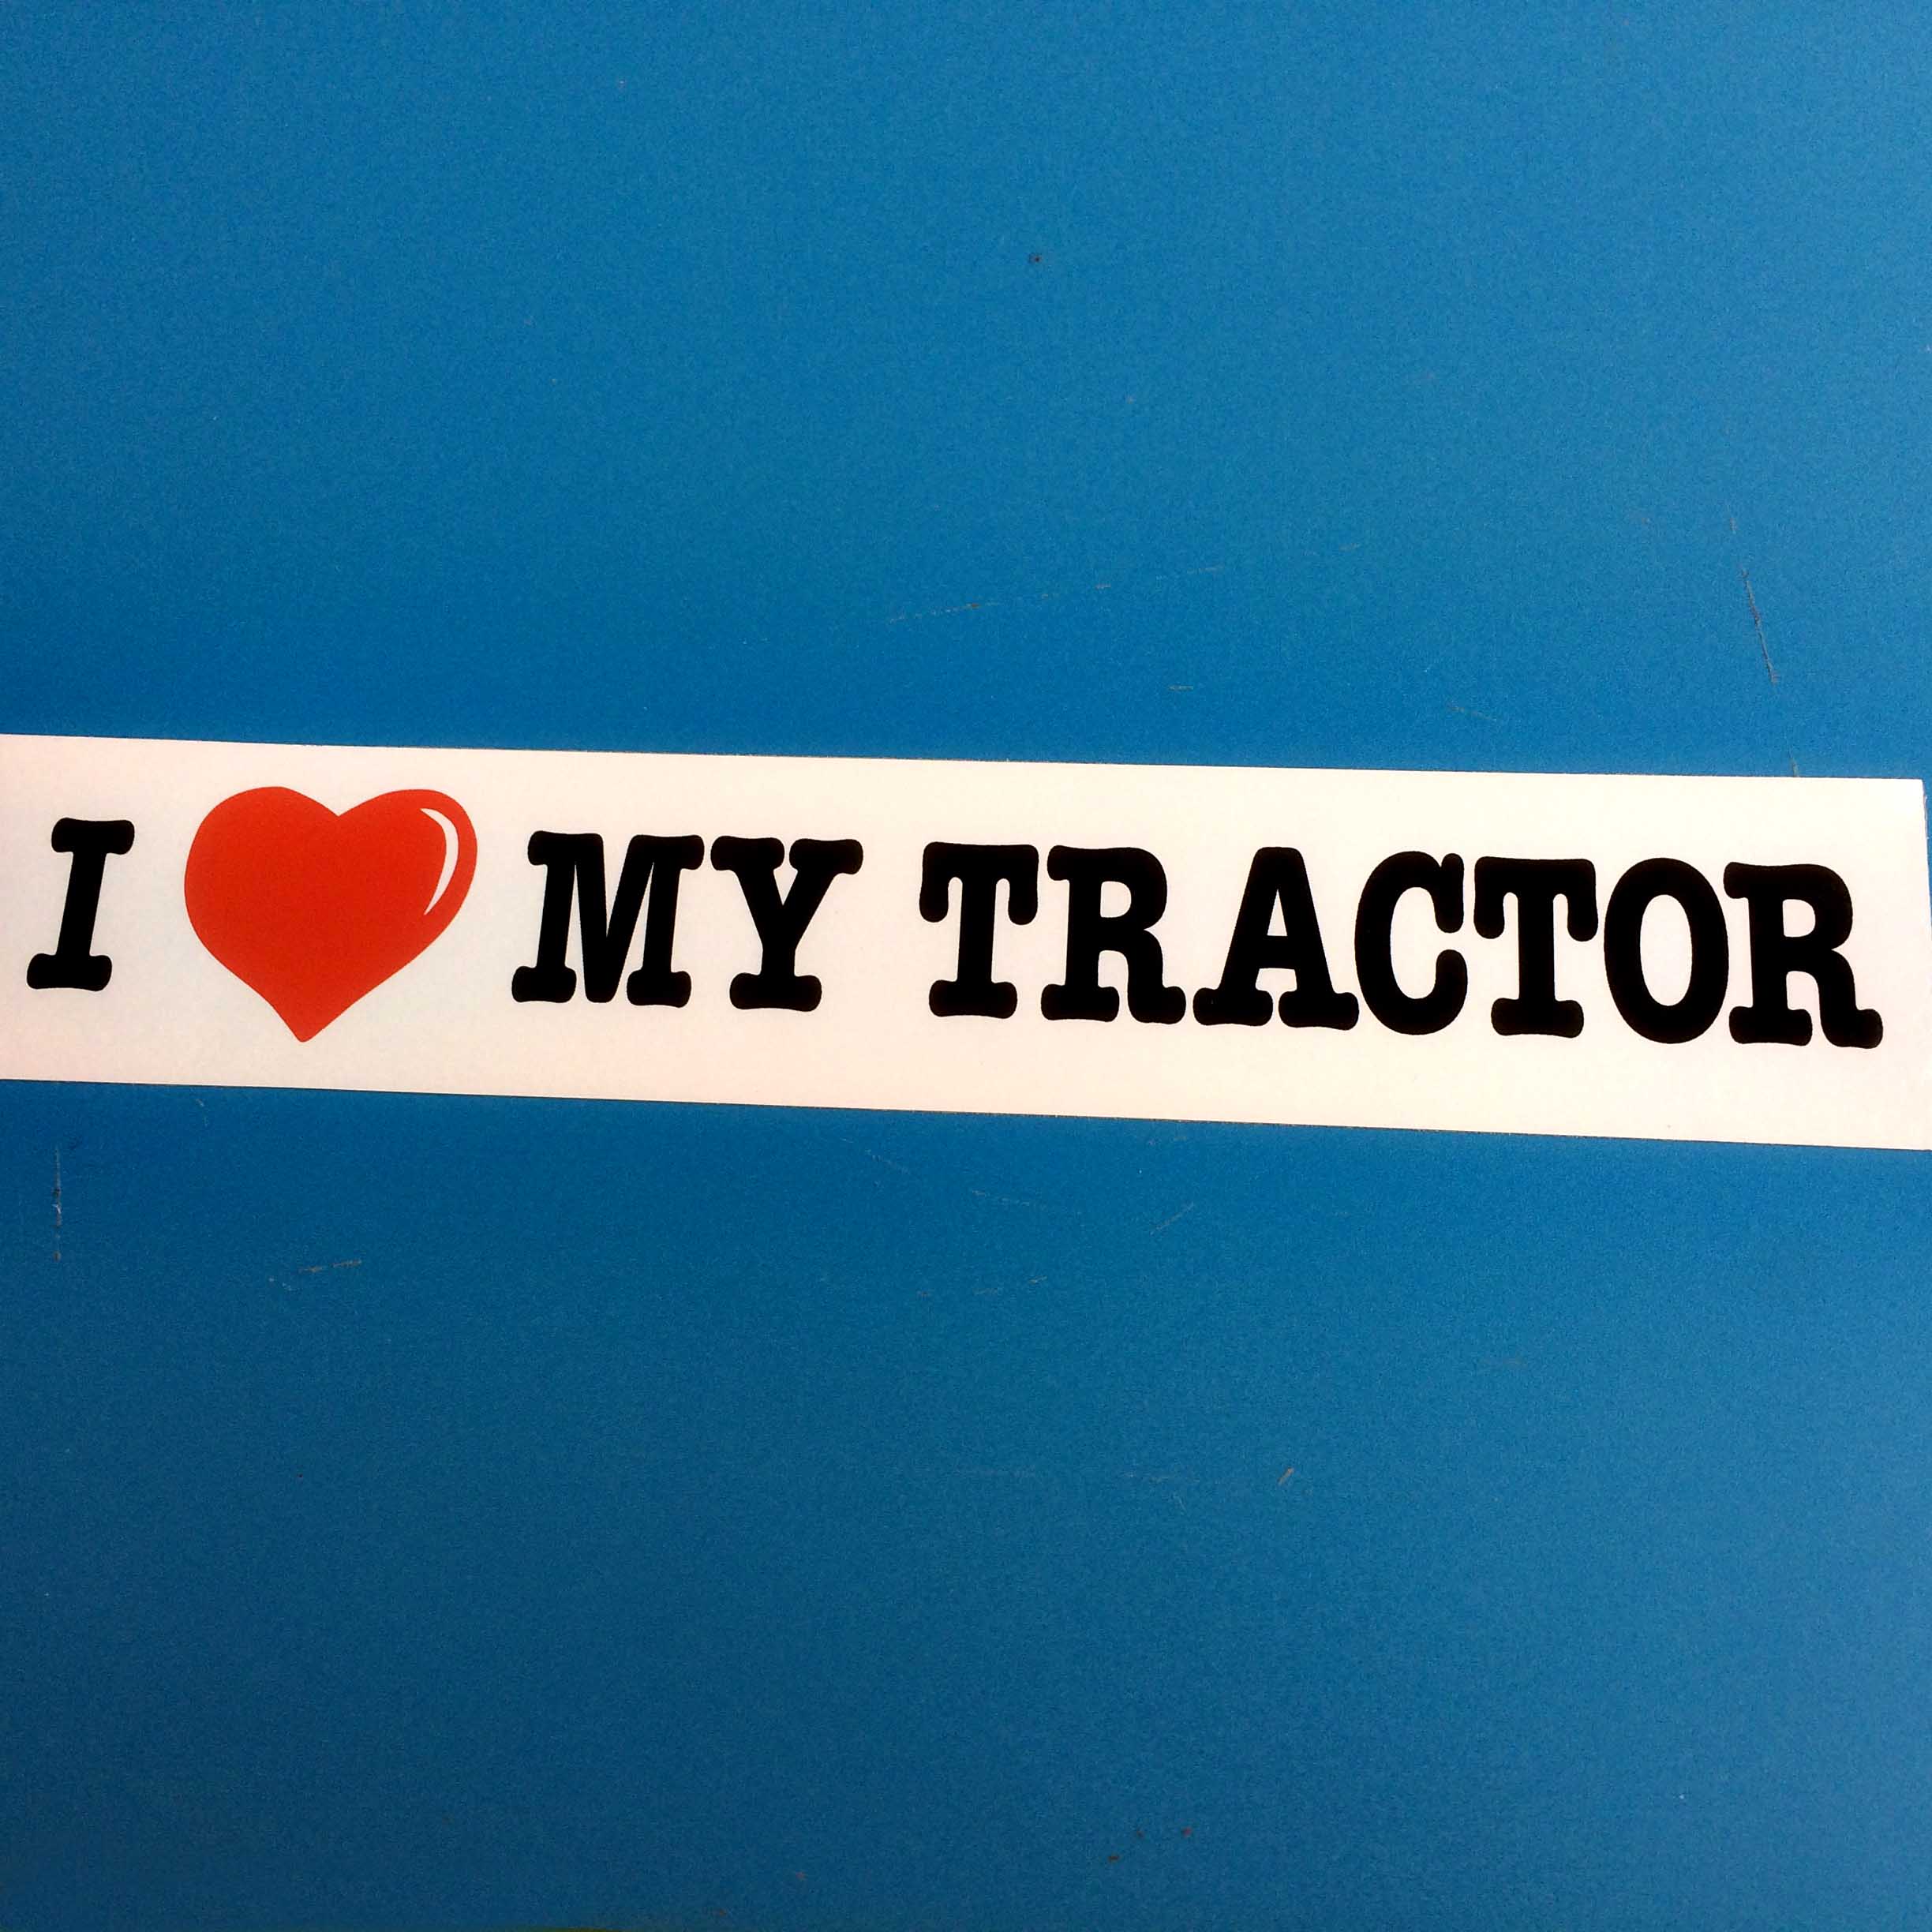 I LOVE MY TRACTOR STICKER. A red love heart sits between I and My Tractor in bold black lettering on a white background.